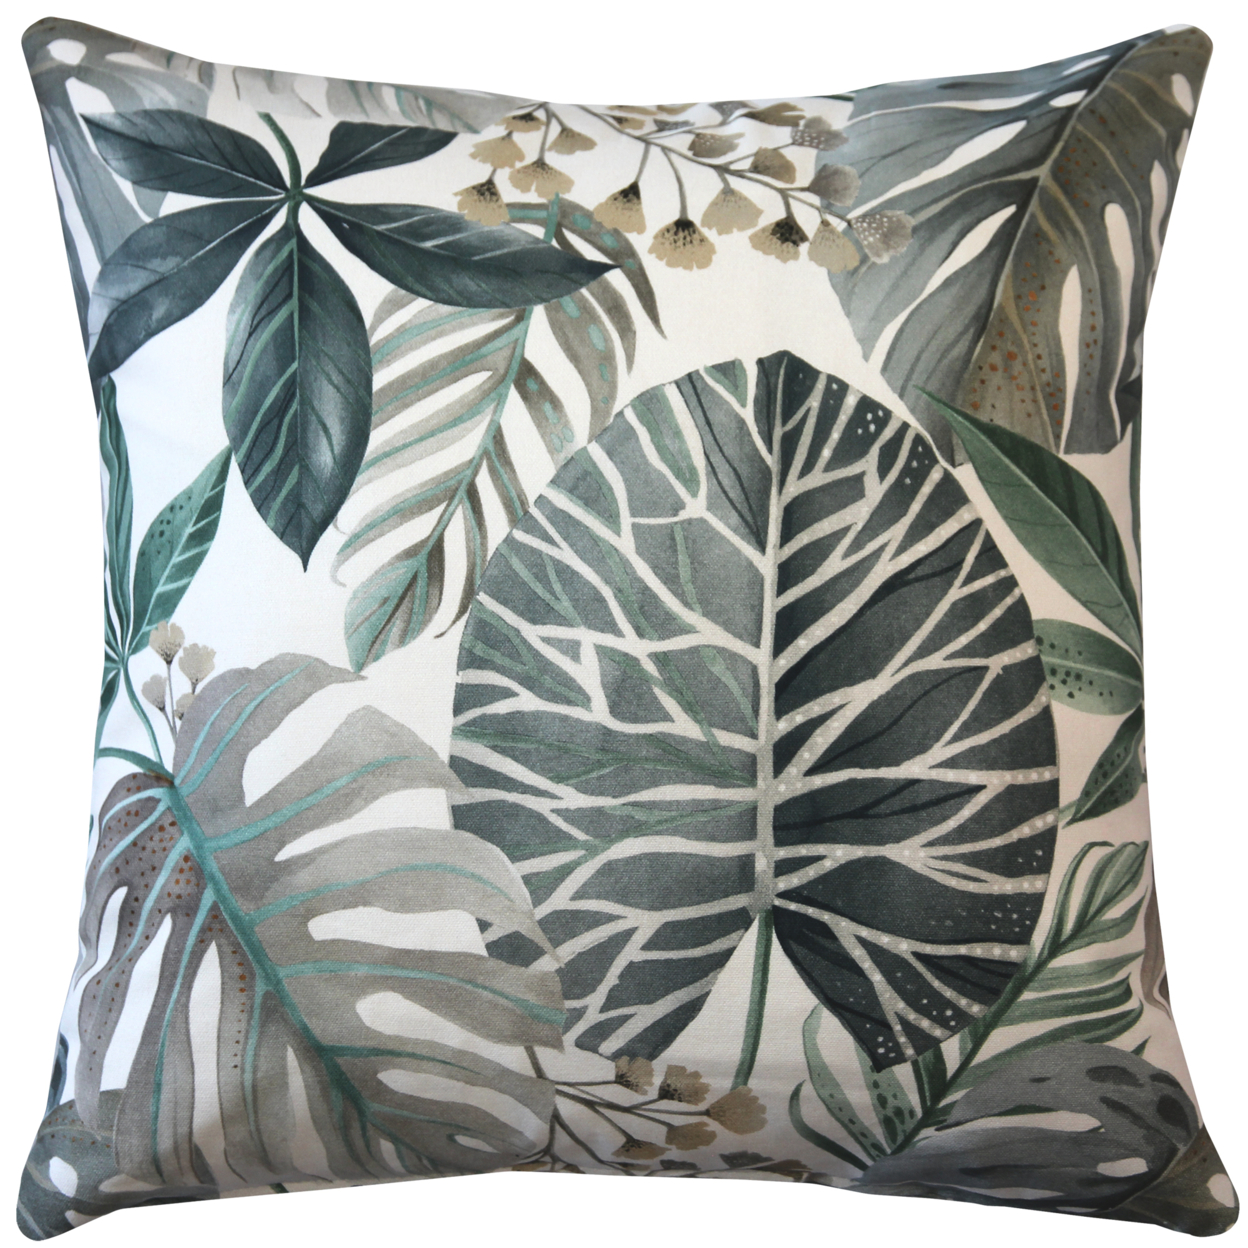 Thai Garden Gray Leaf Throw Pillow 20x20 Inches Square, Complete Pillow With Polyfill Pillow Insert